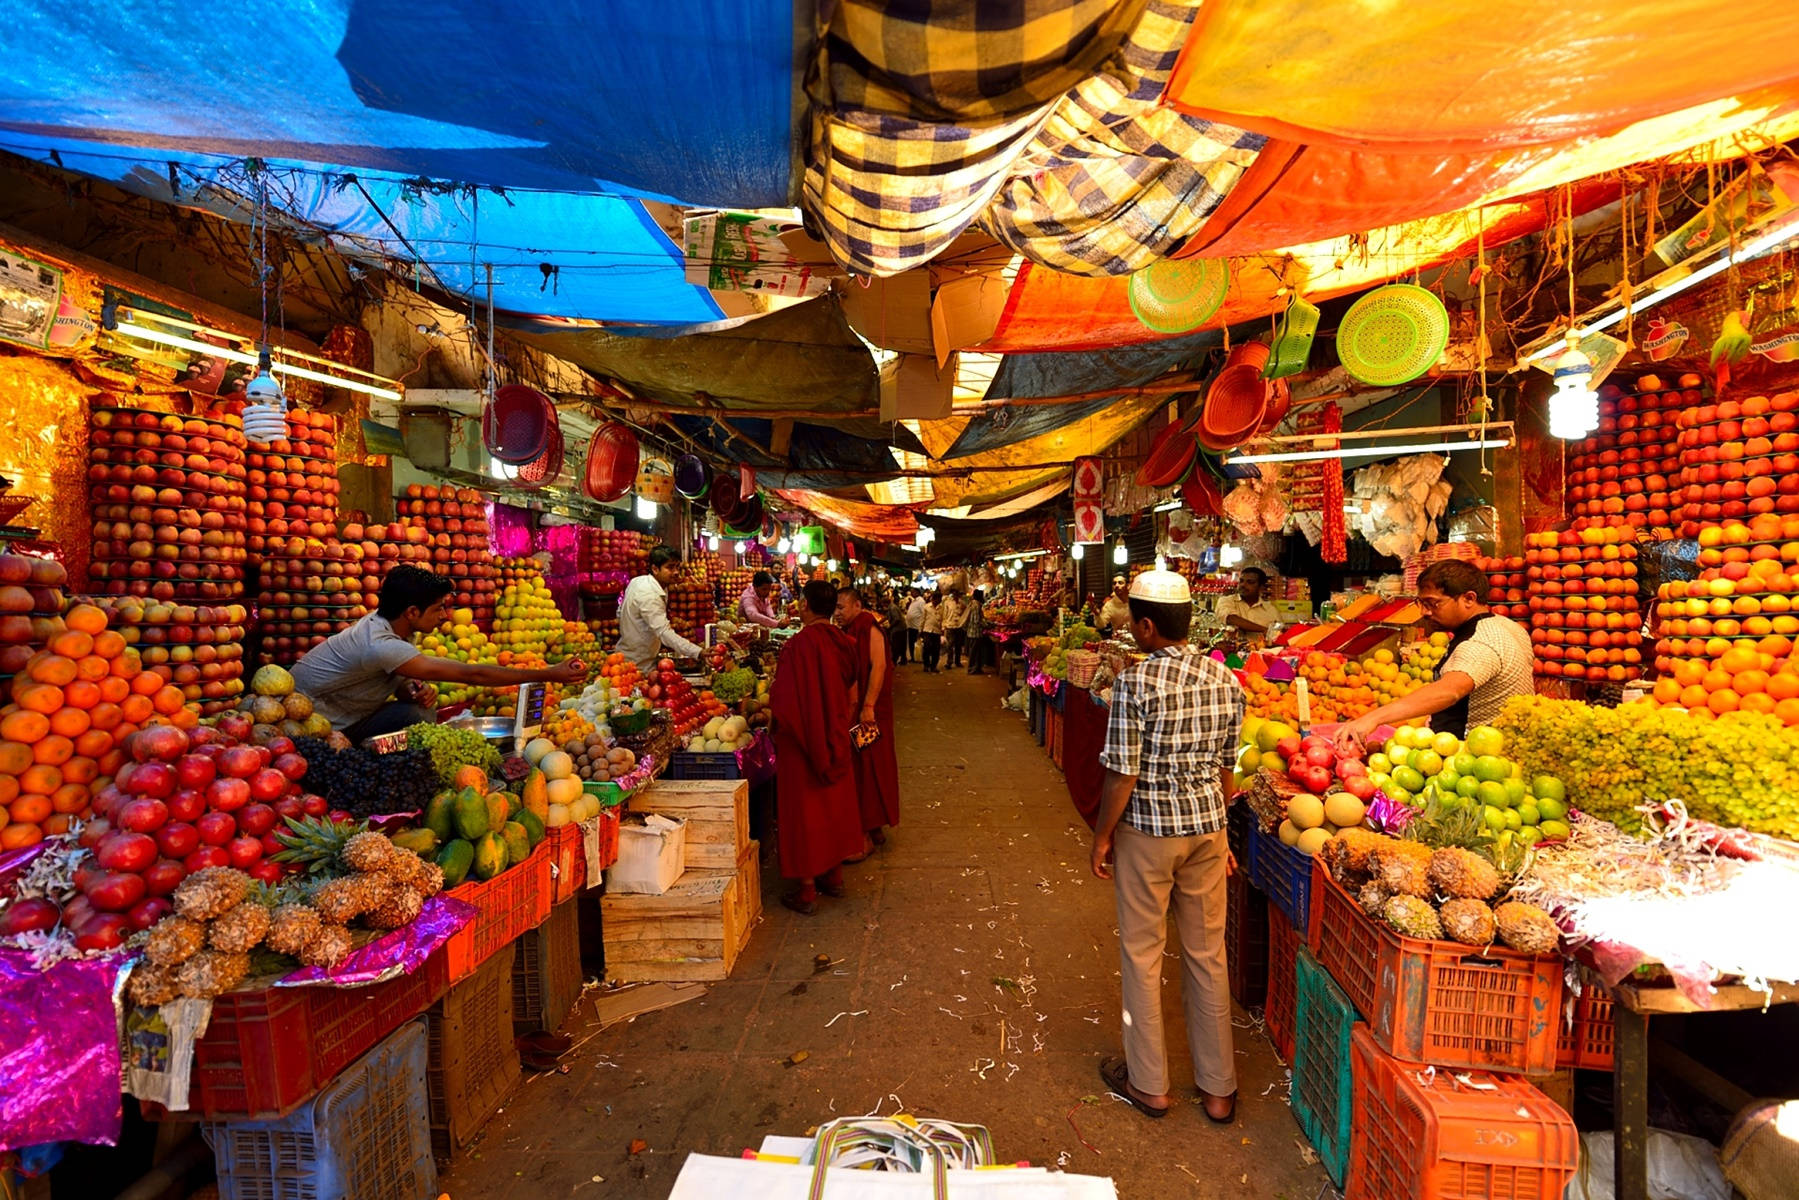 Fruits Market In India Background